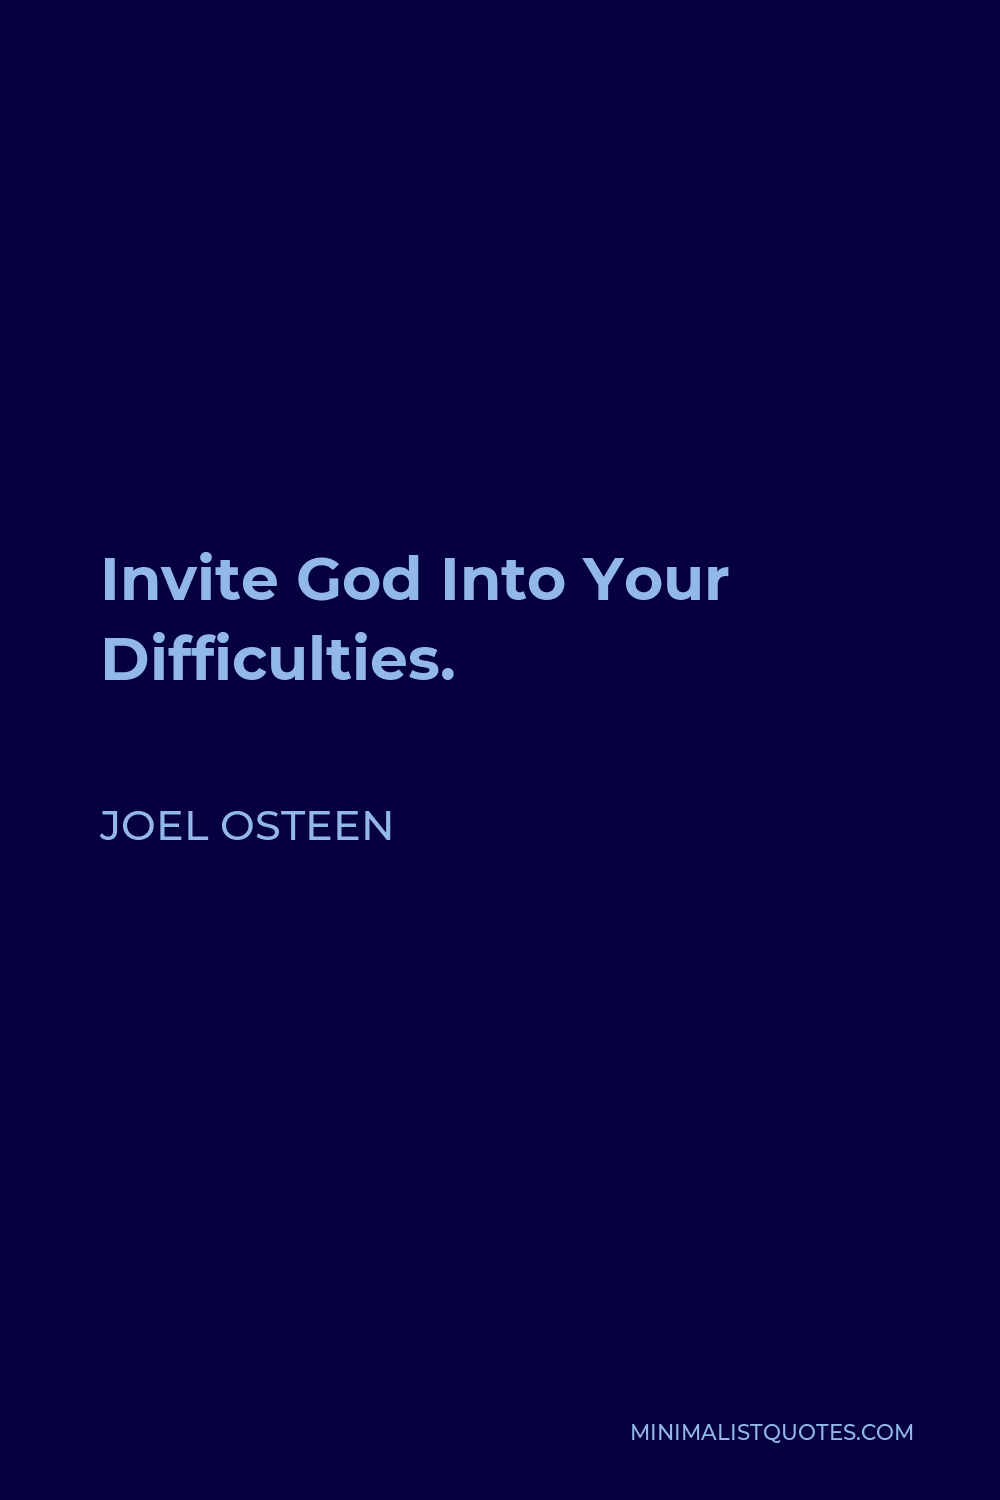 Joel Osteen Quote - Invite God Into Your Difficulties.